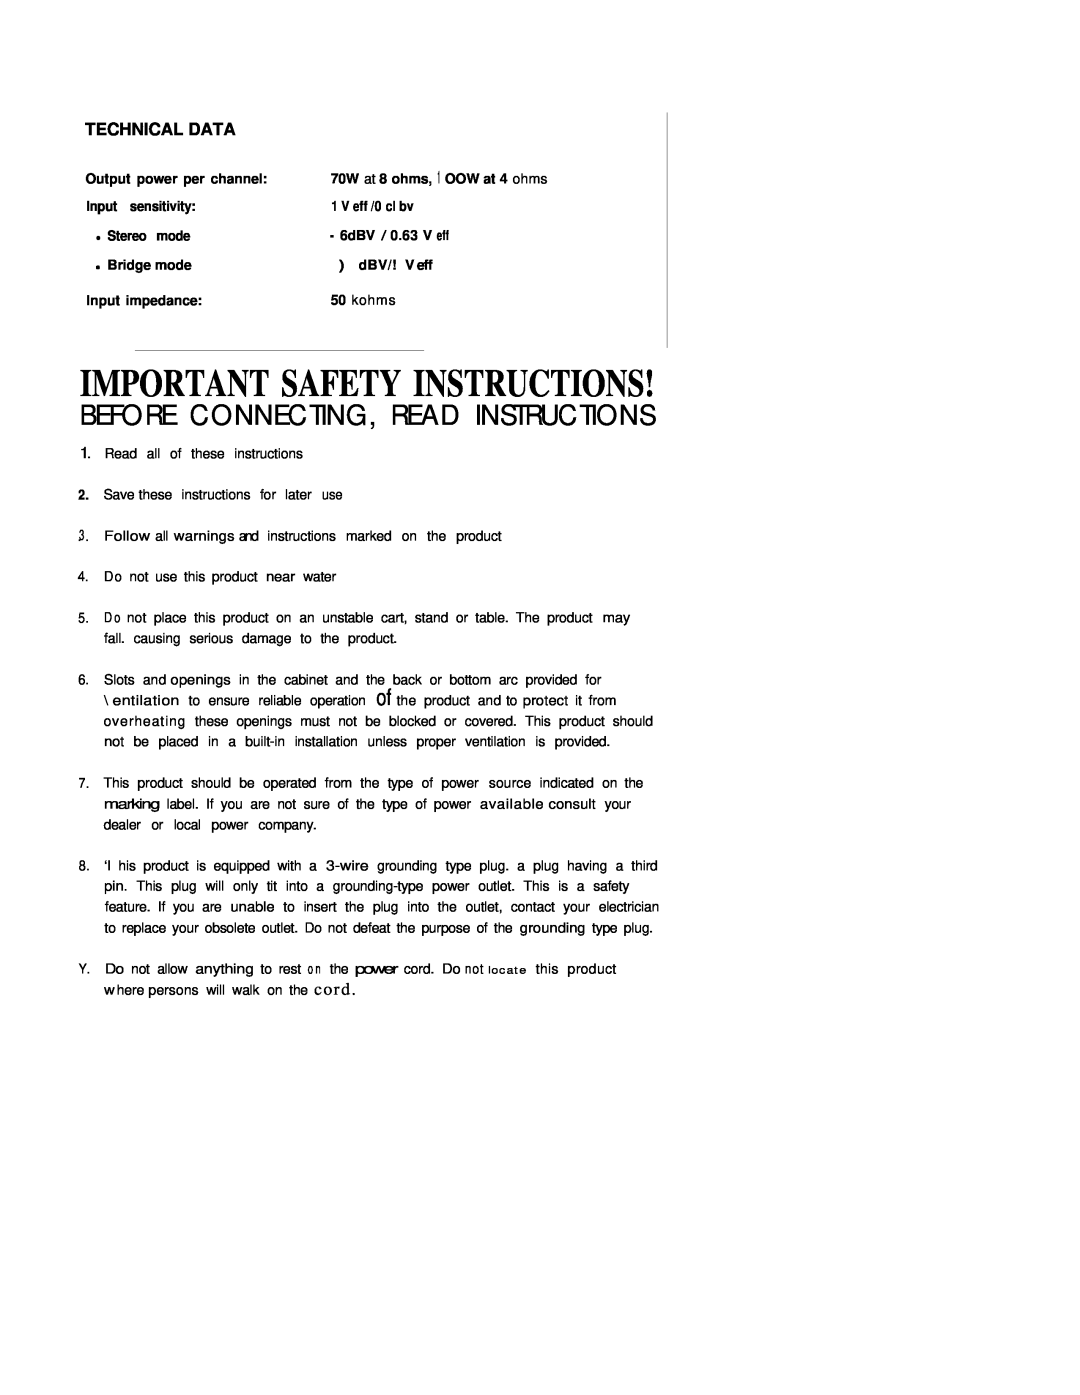 Hughes & Kettner CF 200 Important Safety Instructions, Before Connecting, Read Instructions, Technical Data, Stereo mode 